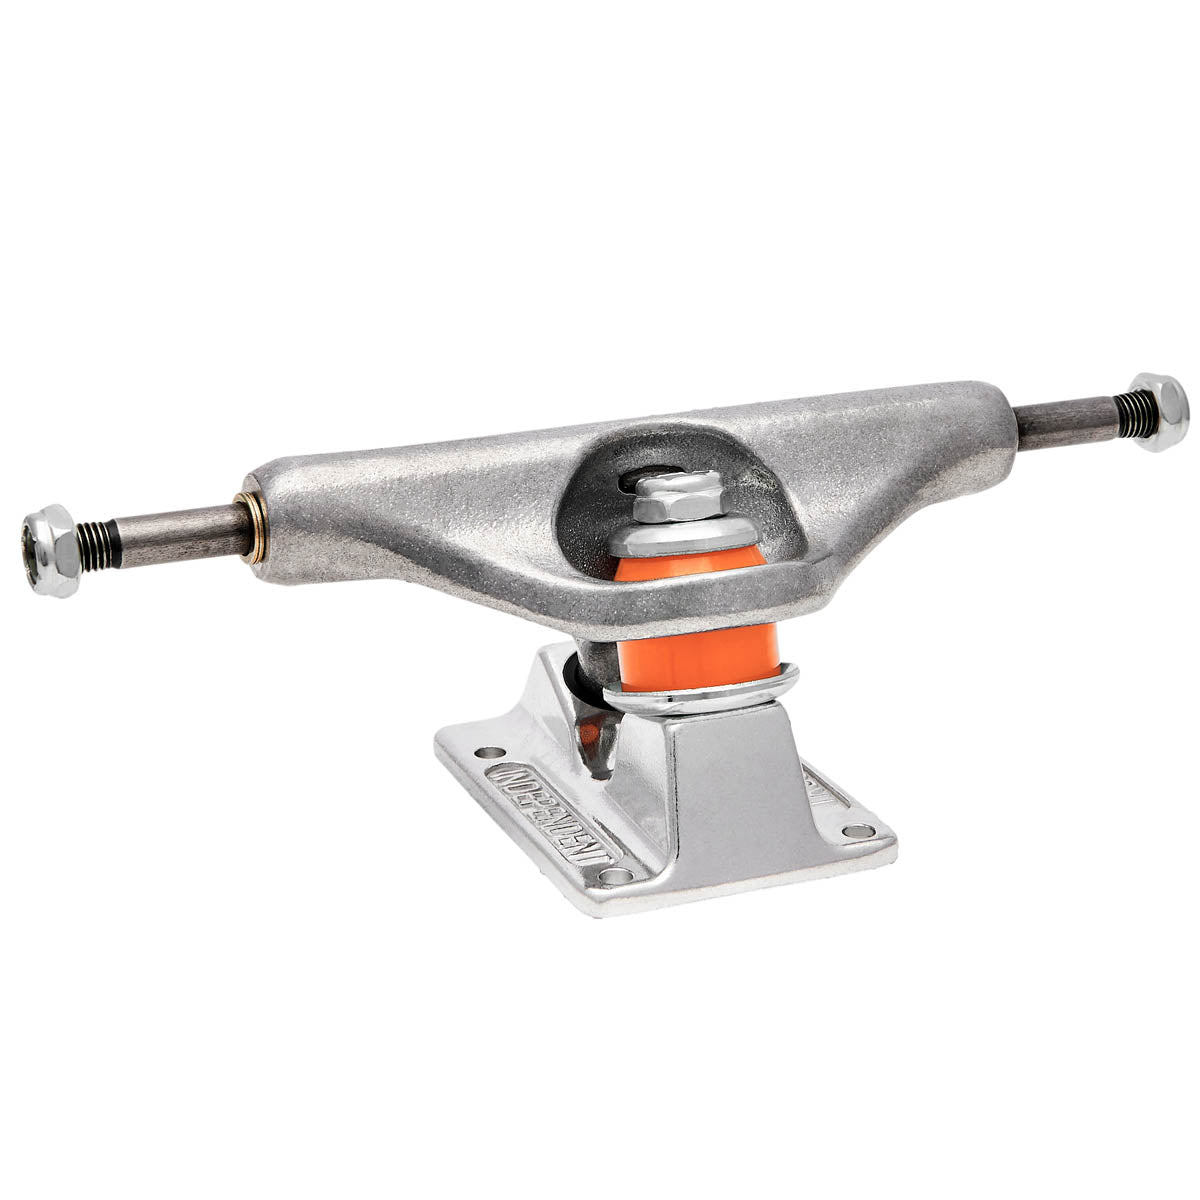 Independent Stage 11 Forged Hollow Standard Skateboard Trucks - Silver image 2